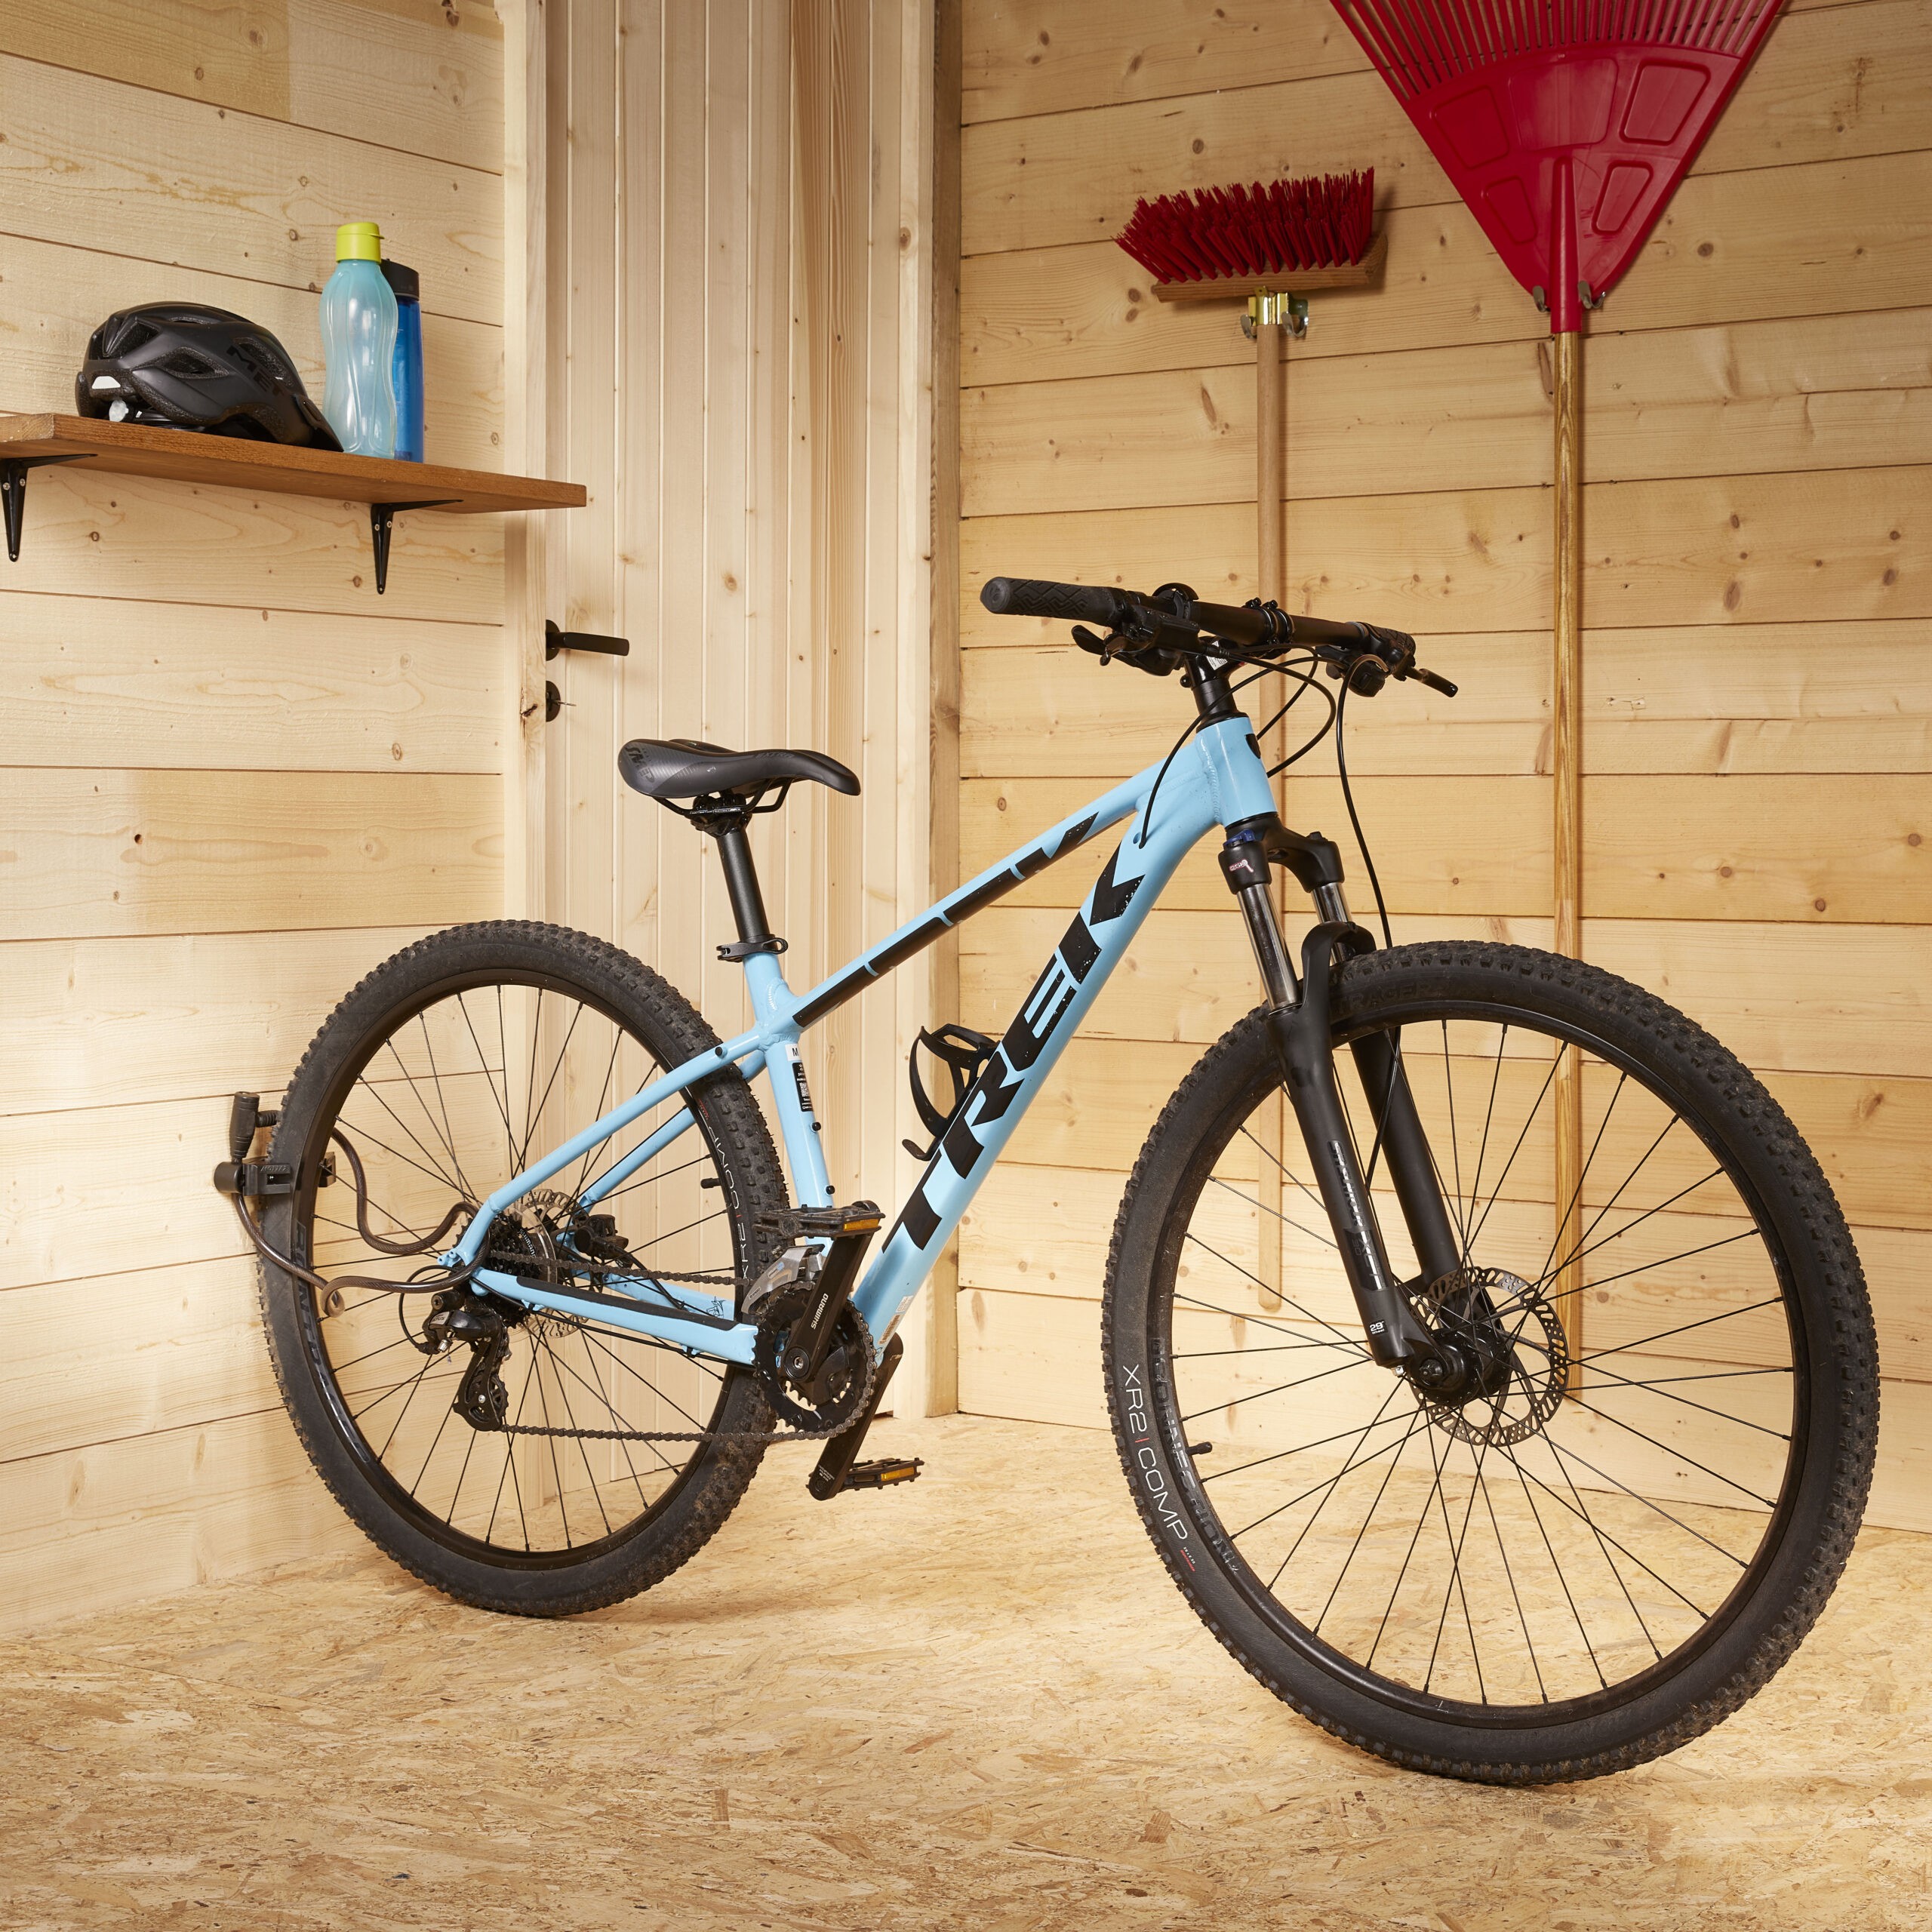 Mottez wall-mounted bike rack M055Q for bikes with 23-70mm tires